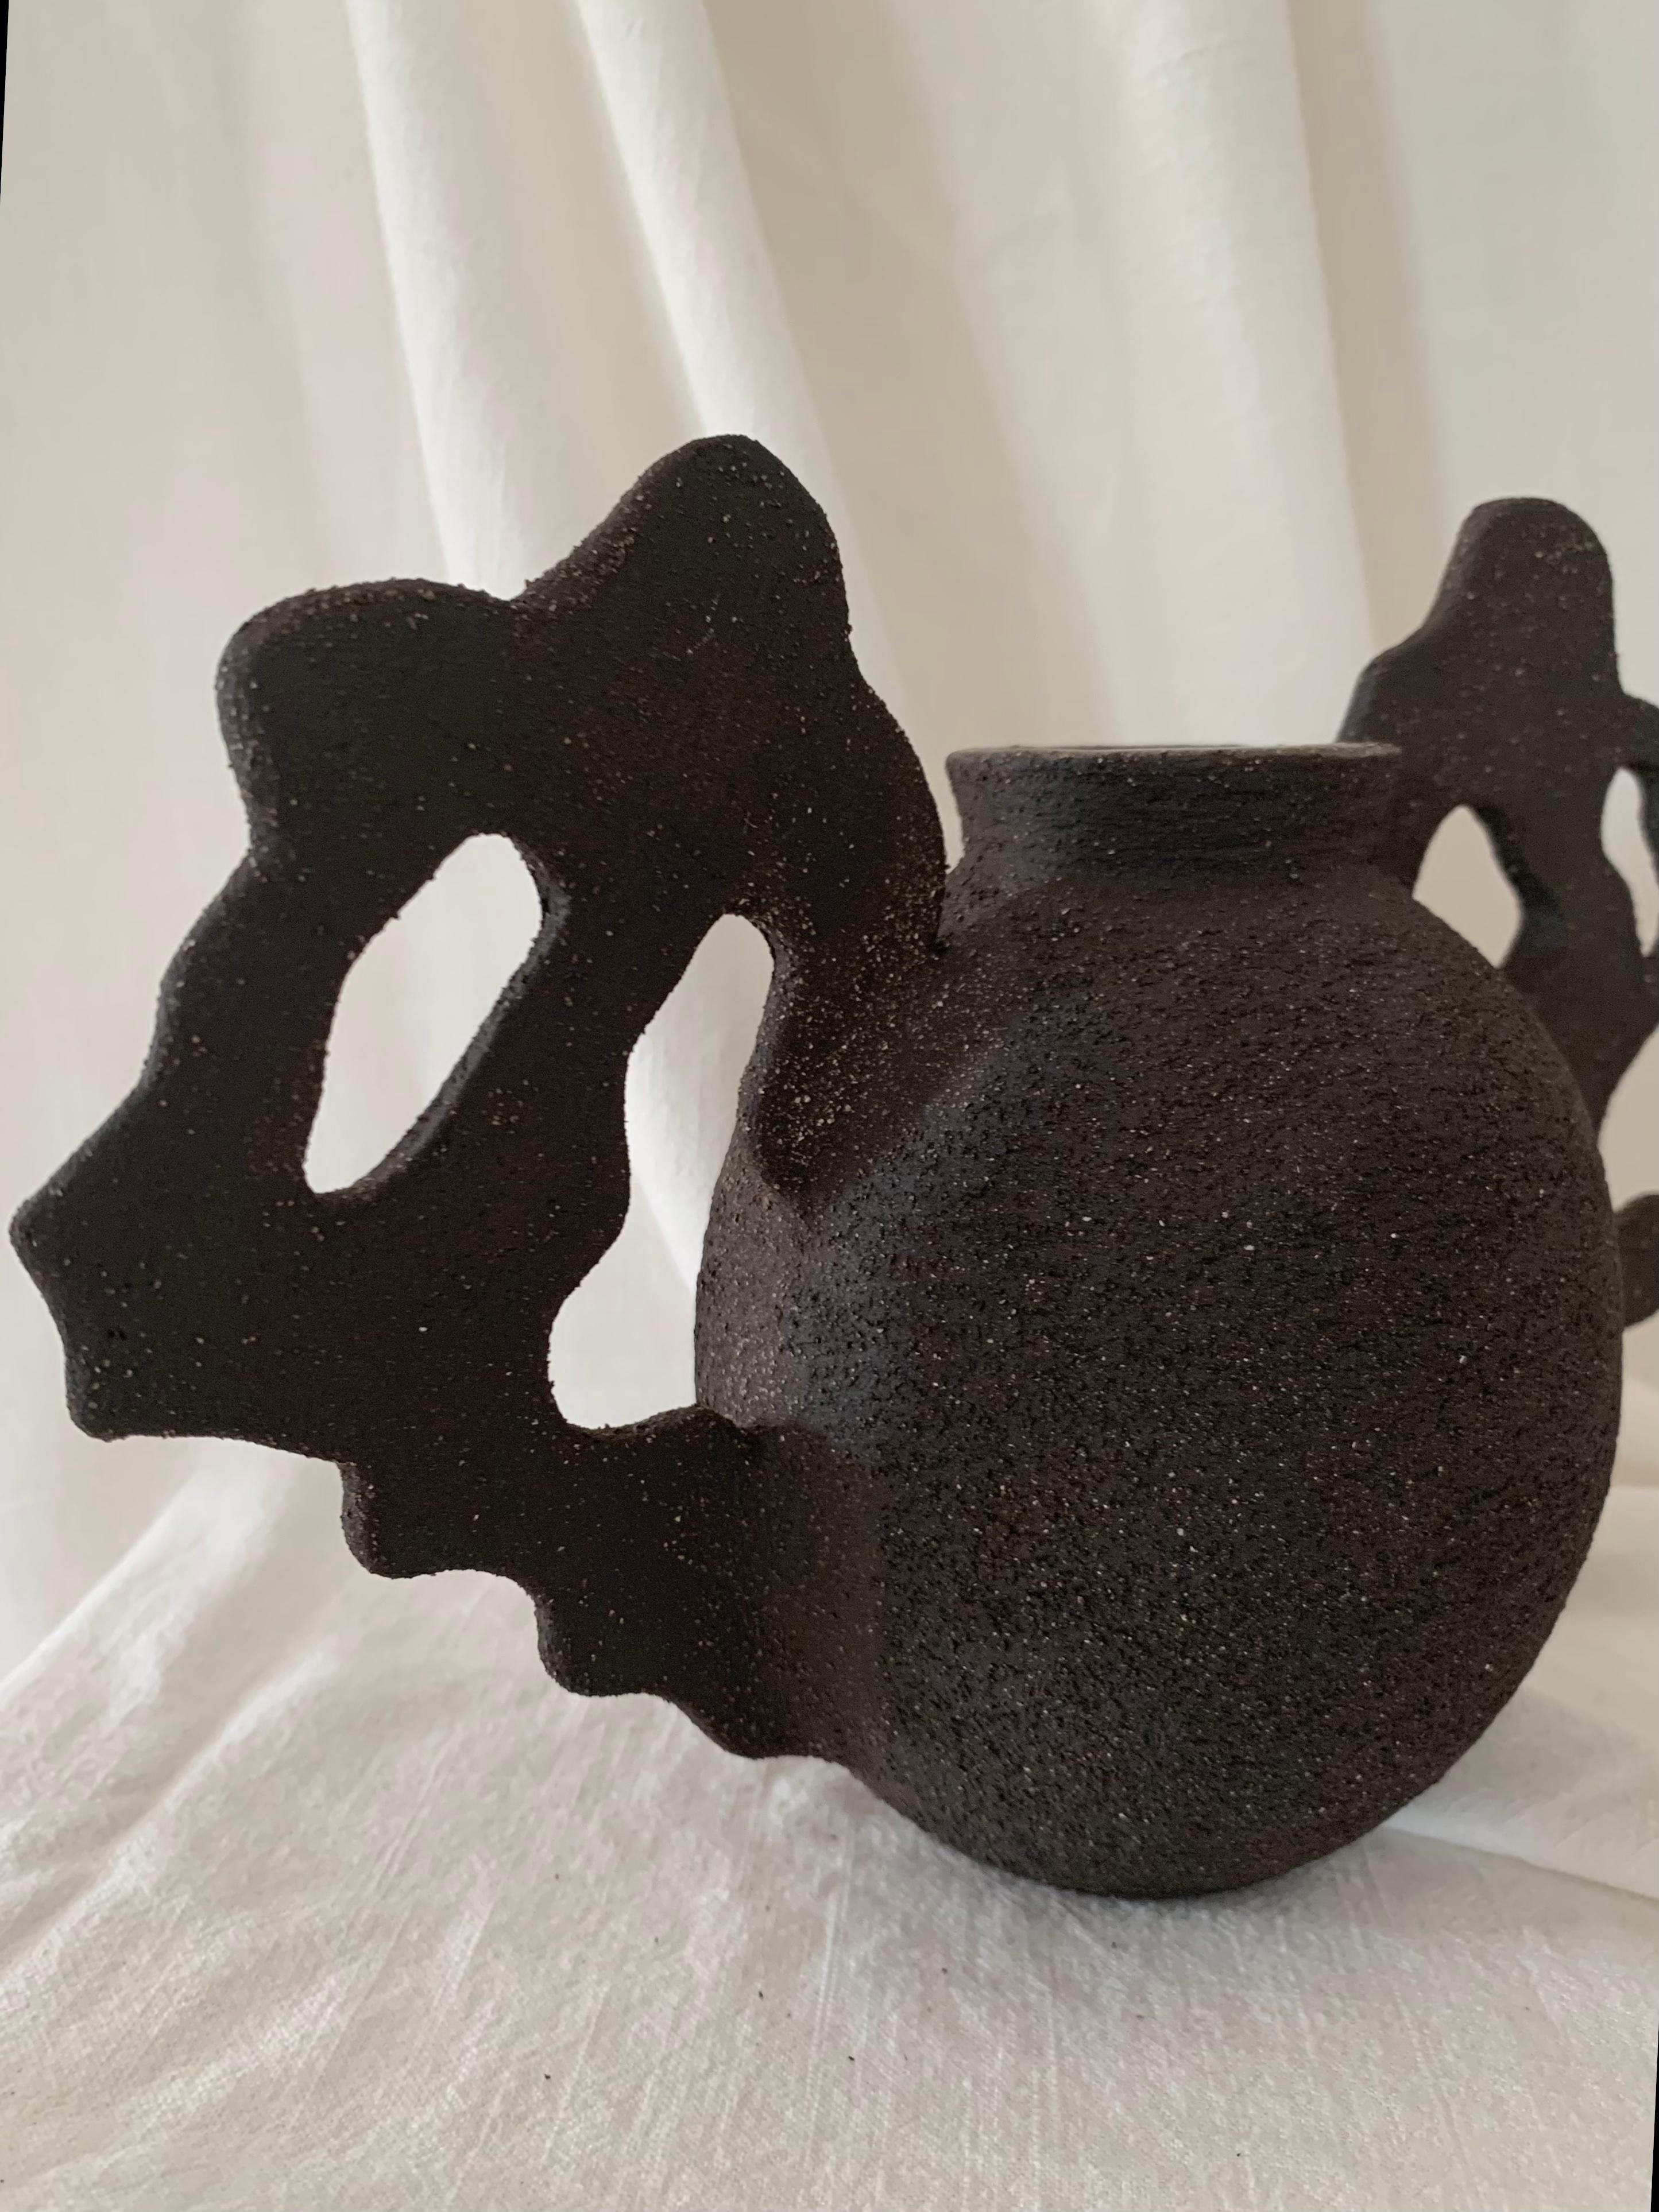 Glazed Contemporary Ruby Bell Ceramics Black Round Vessel with Organic Side Detail For Sale